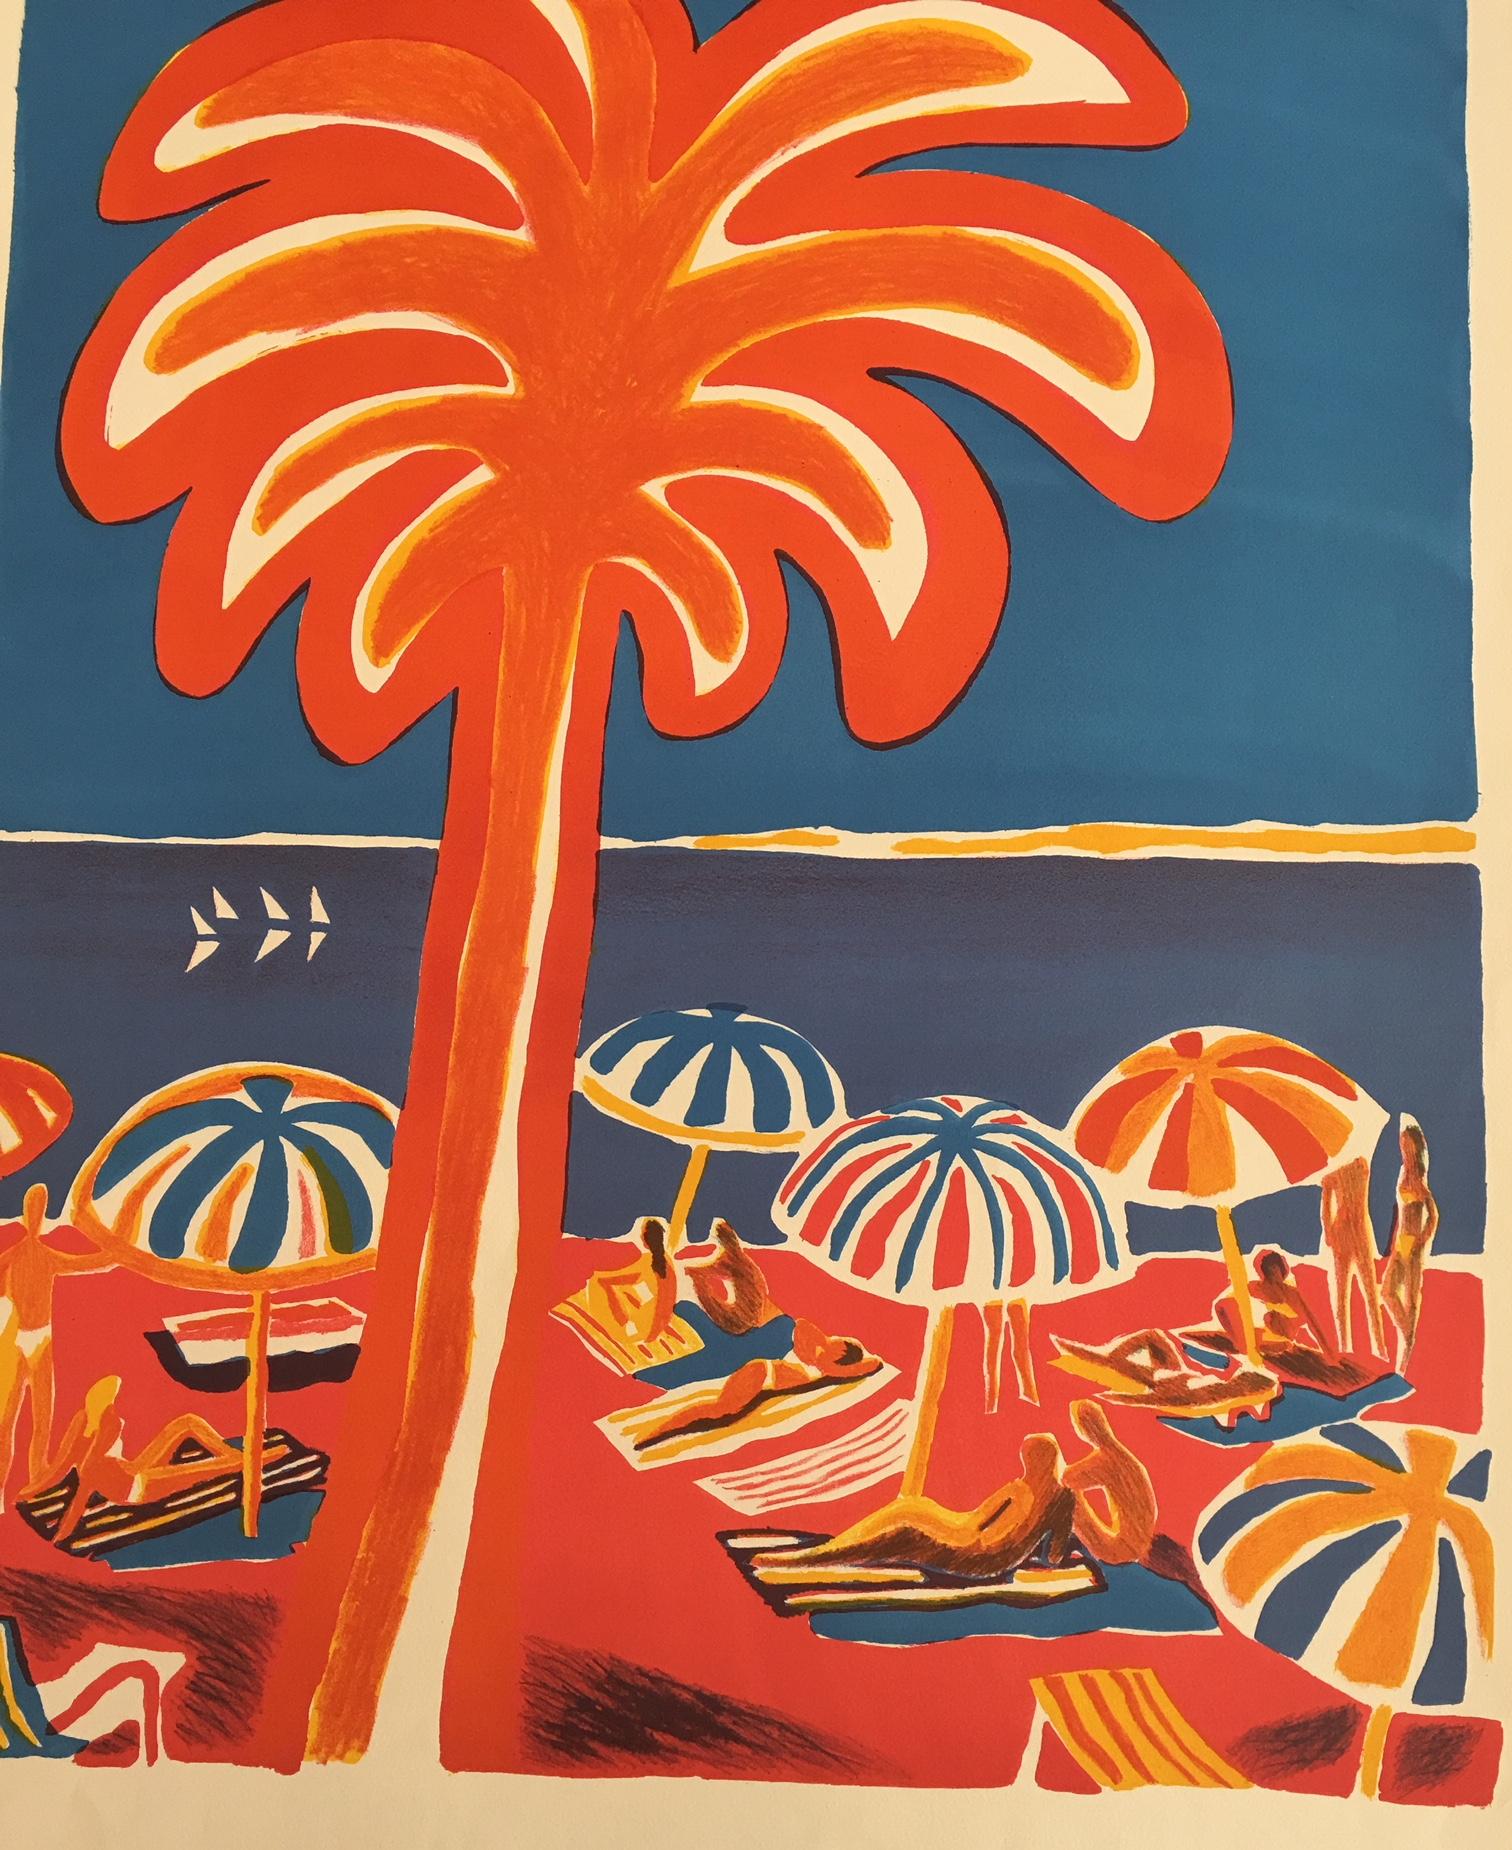 Original vintage poster, D’apres by Bernard Villemot, original lithograph, 1990.

Bernard Villemot was a French graphic artist known primarily for his iconic advertising images for Orangina, Bally Shoe, Perrier, and Air France. Poster in Excellent